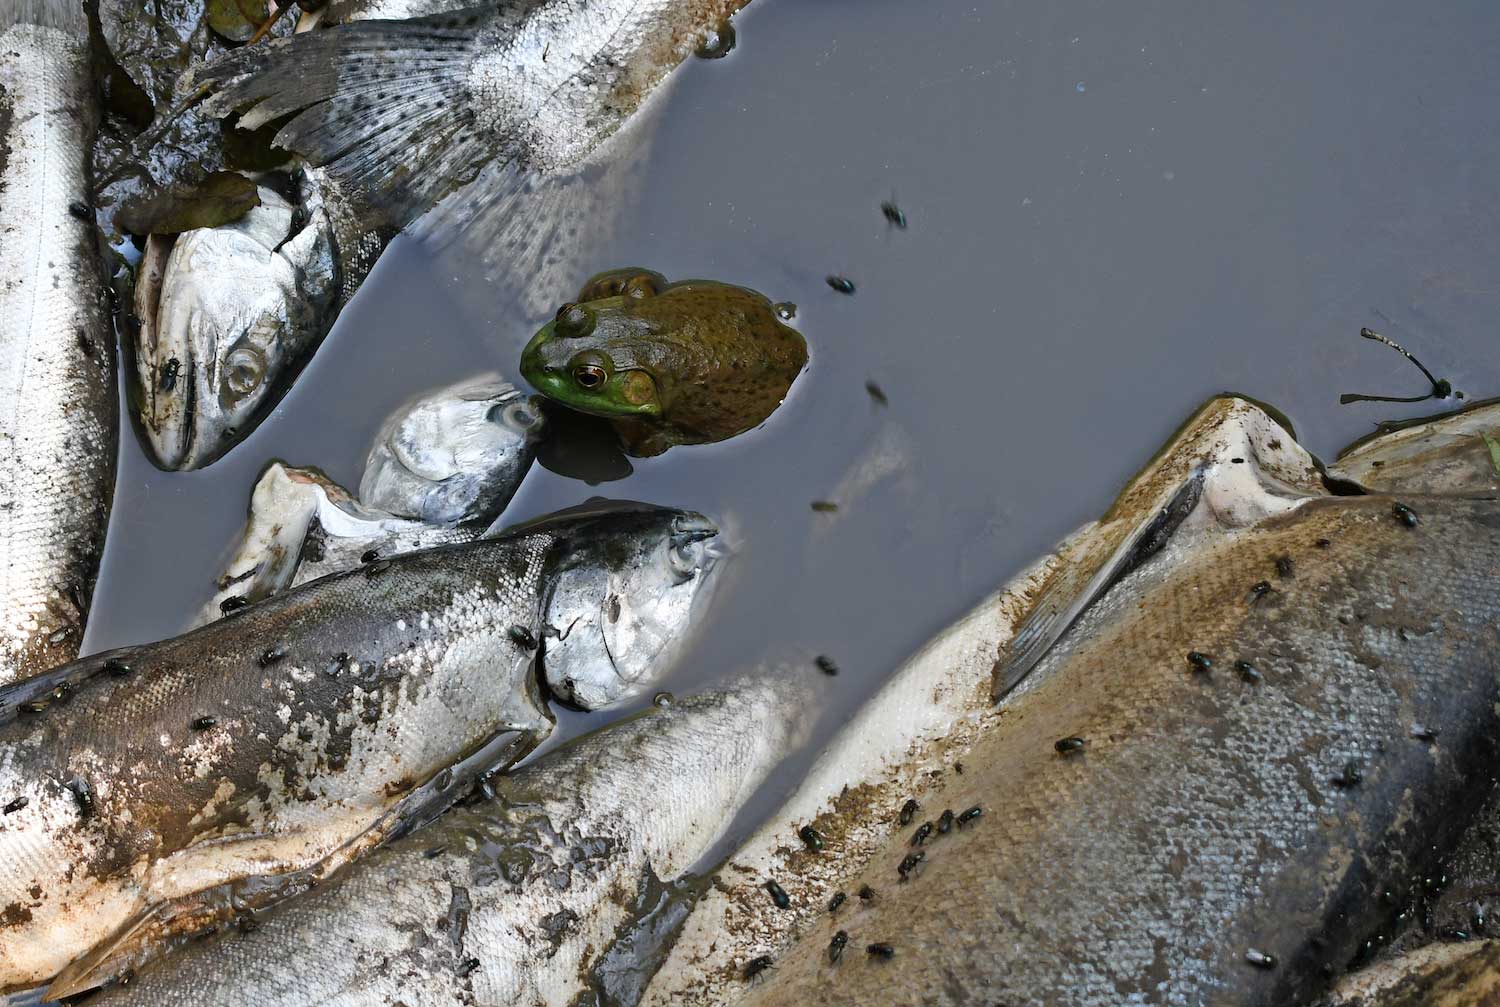 Flies sitting on dead fish in shallow water with a frog in the middle.